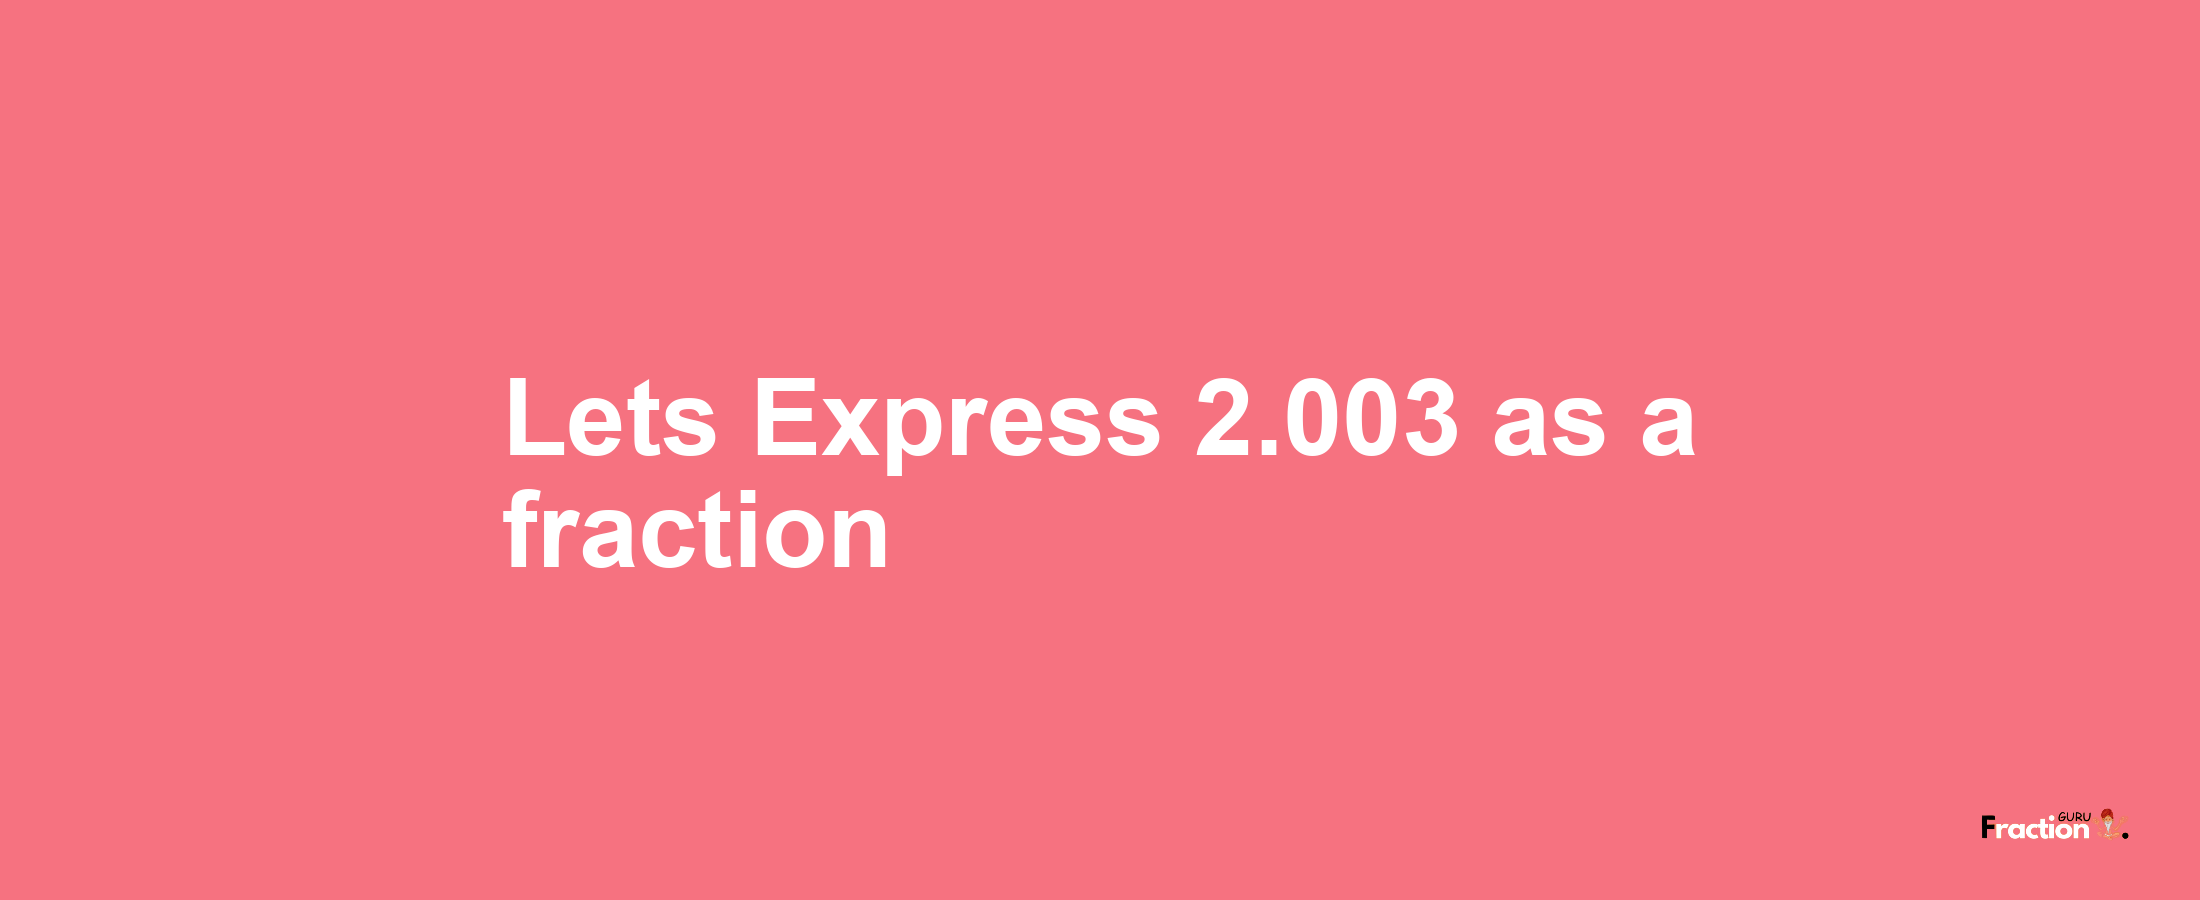 Lets Express 2.003 as afraction